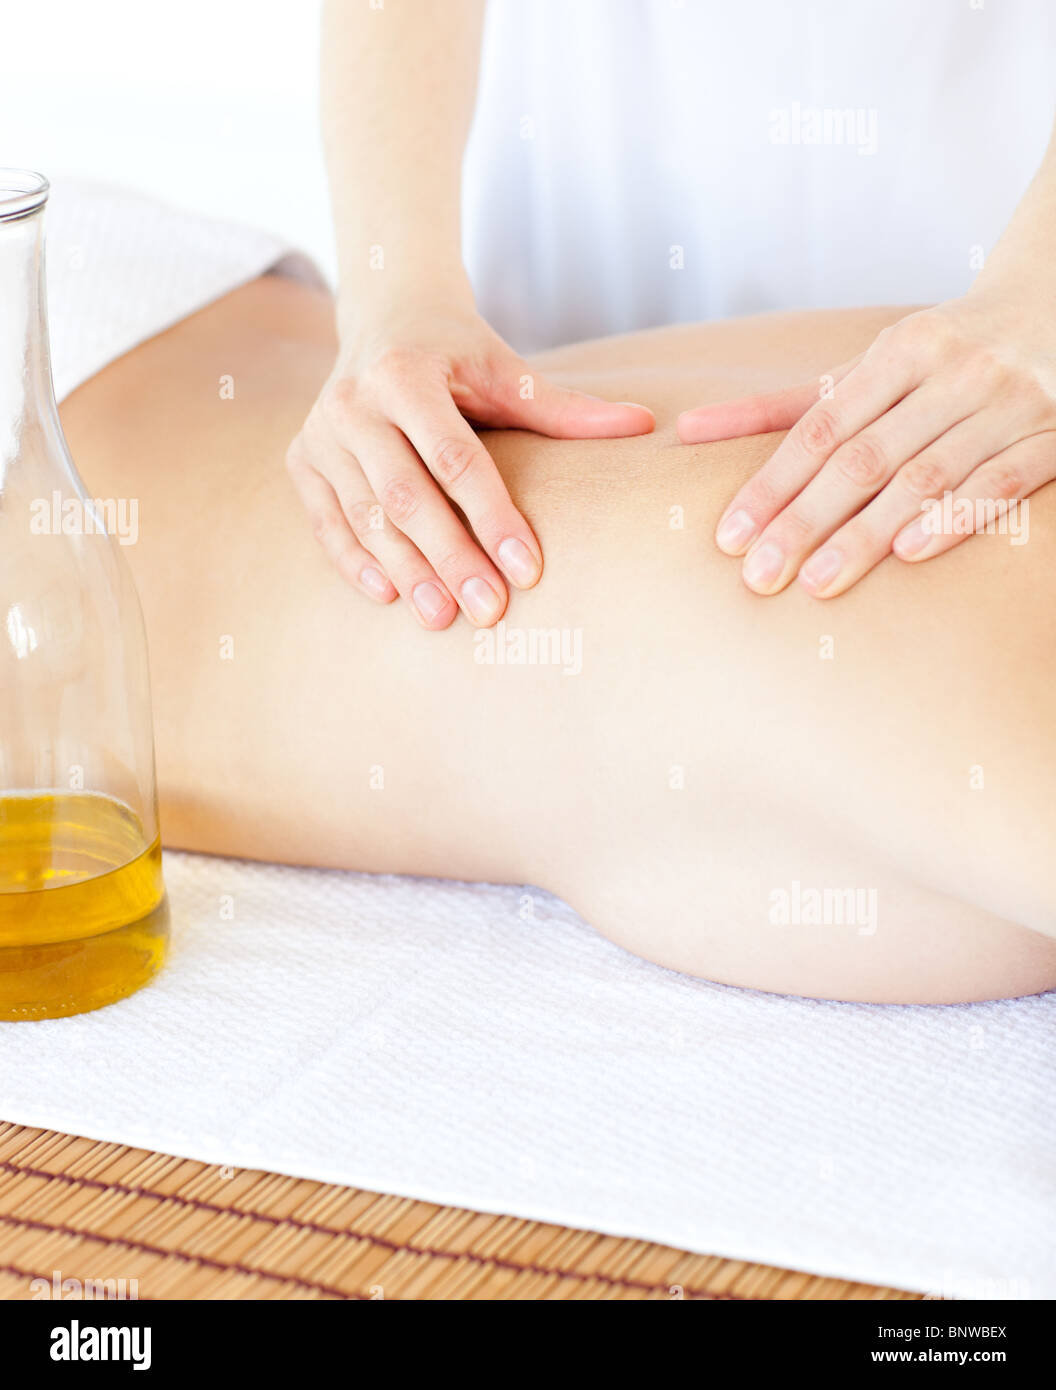 Attractive woman having a massage with massage oil Stock Photo